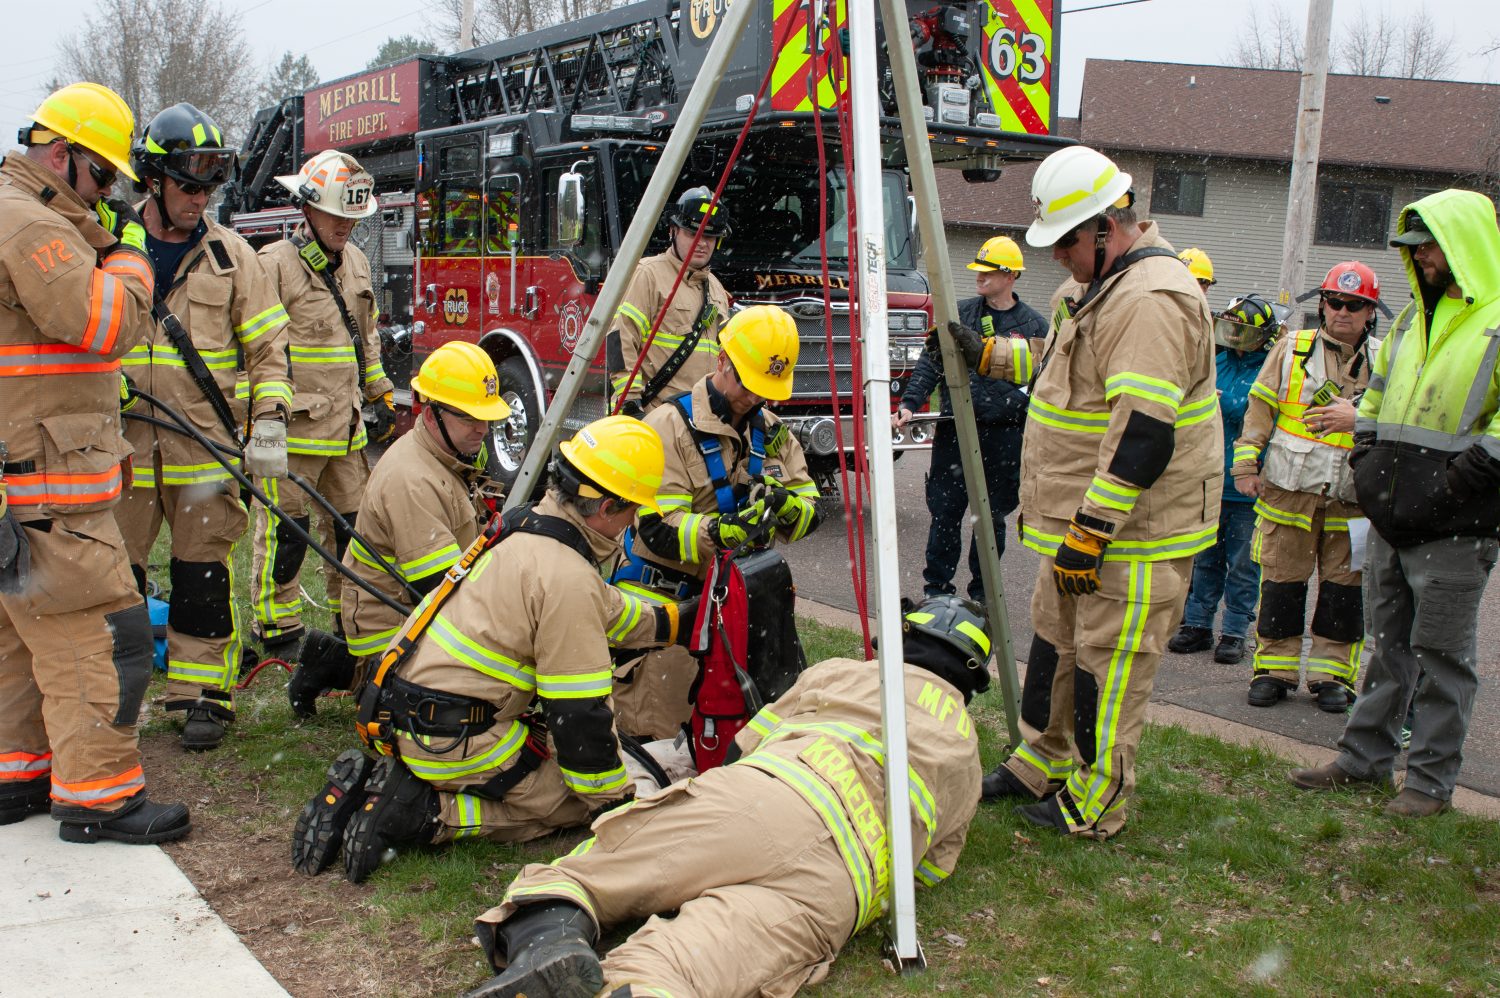 Merrill Fire Department trains for confined spaces rescue